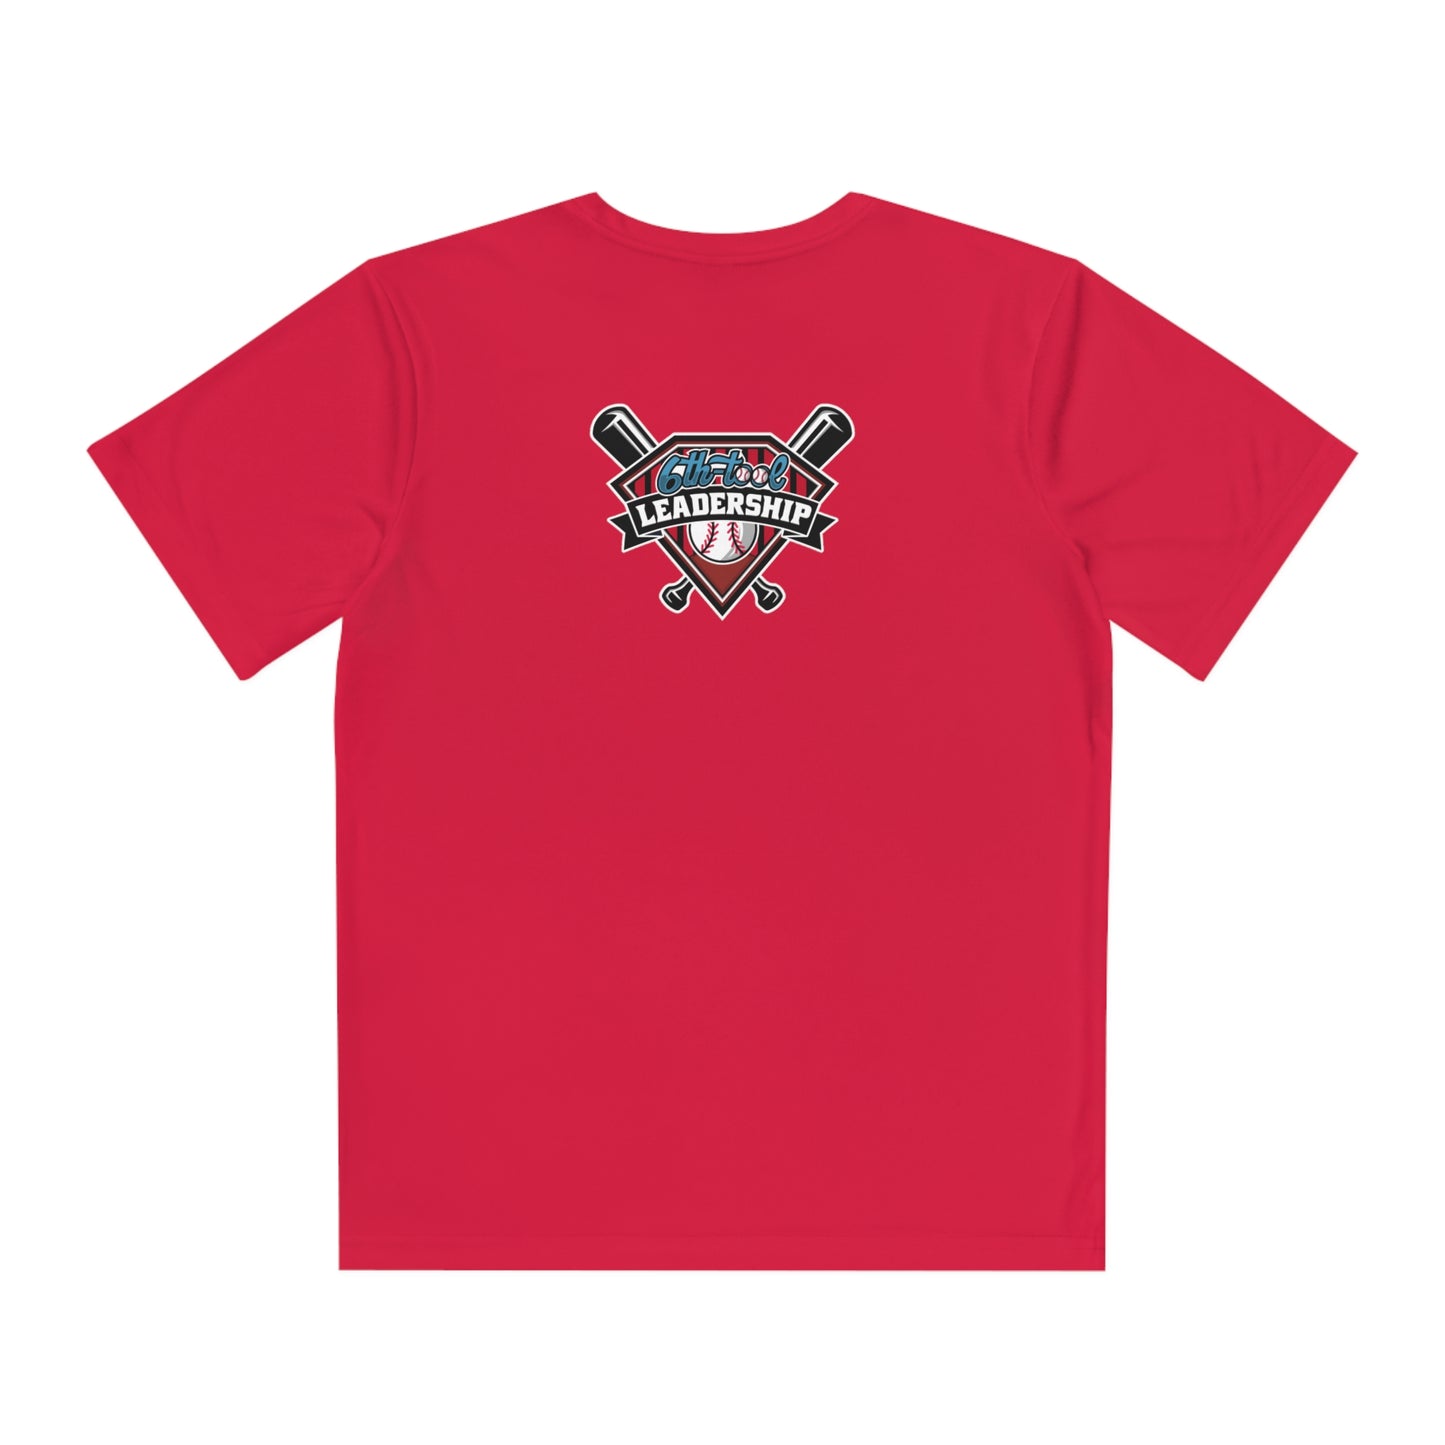 Leader Youth Competitor Tee